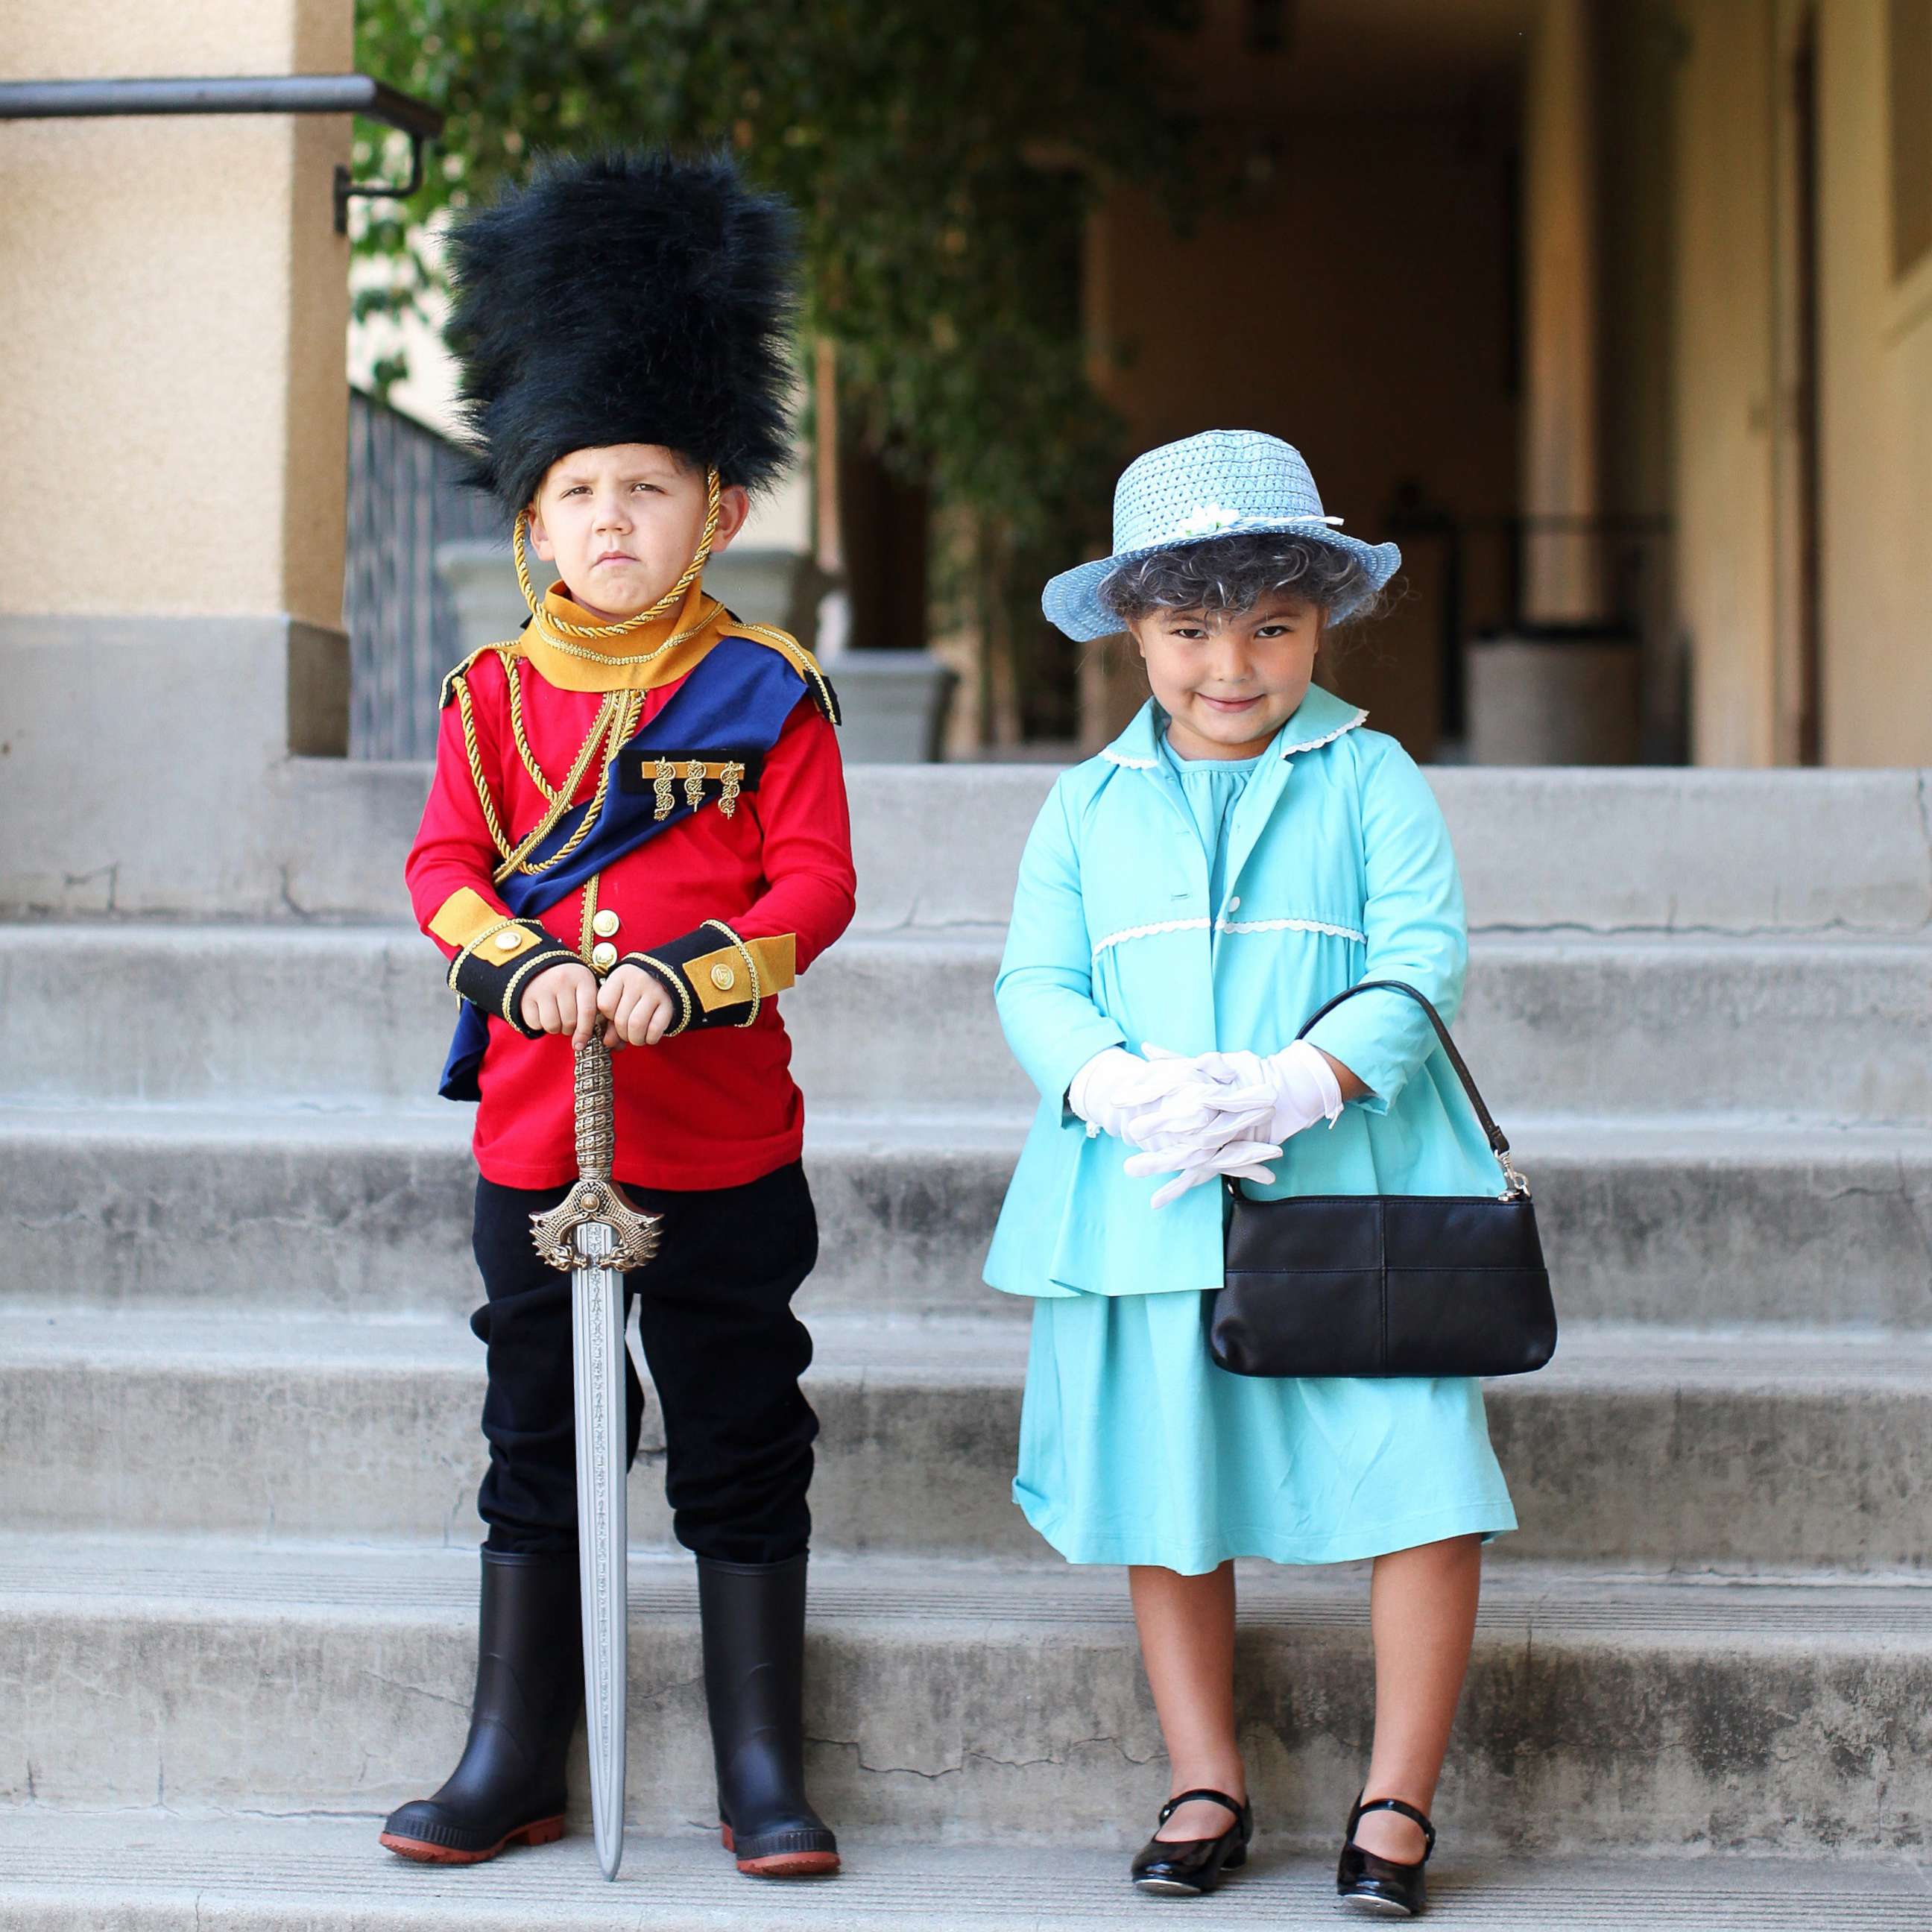 PHOTO: Photographer Gina Lee created a Queen Elizabeth II costume for her 5-year-old daughter, Willow.